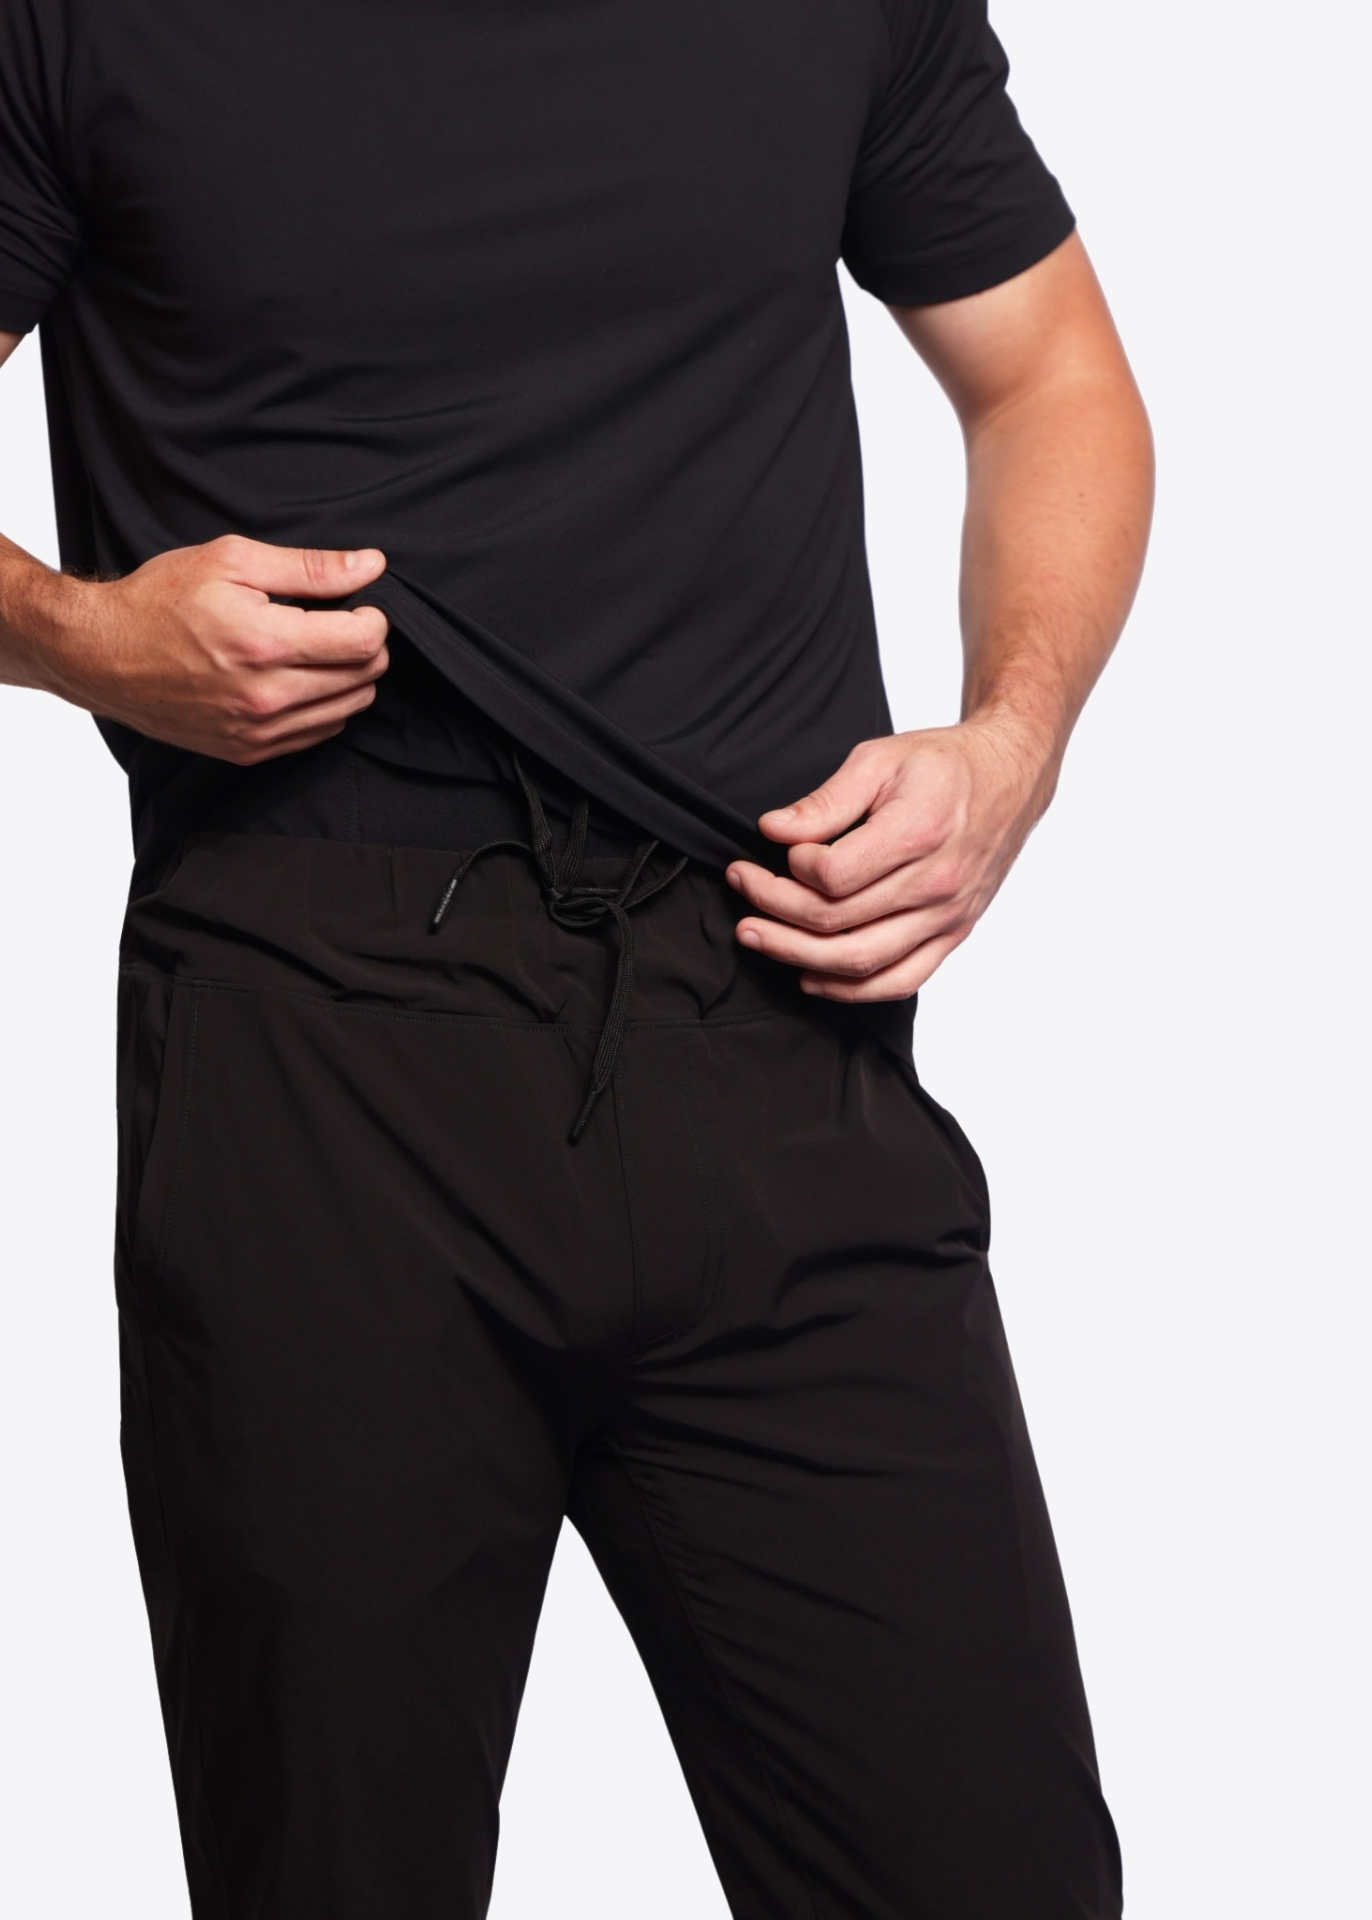 Unicorn French Terry Concealed Carry Lounge Pant